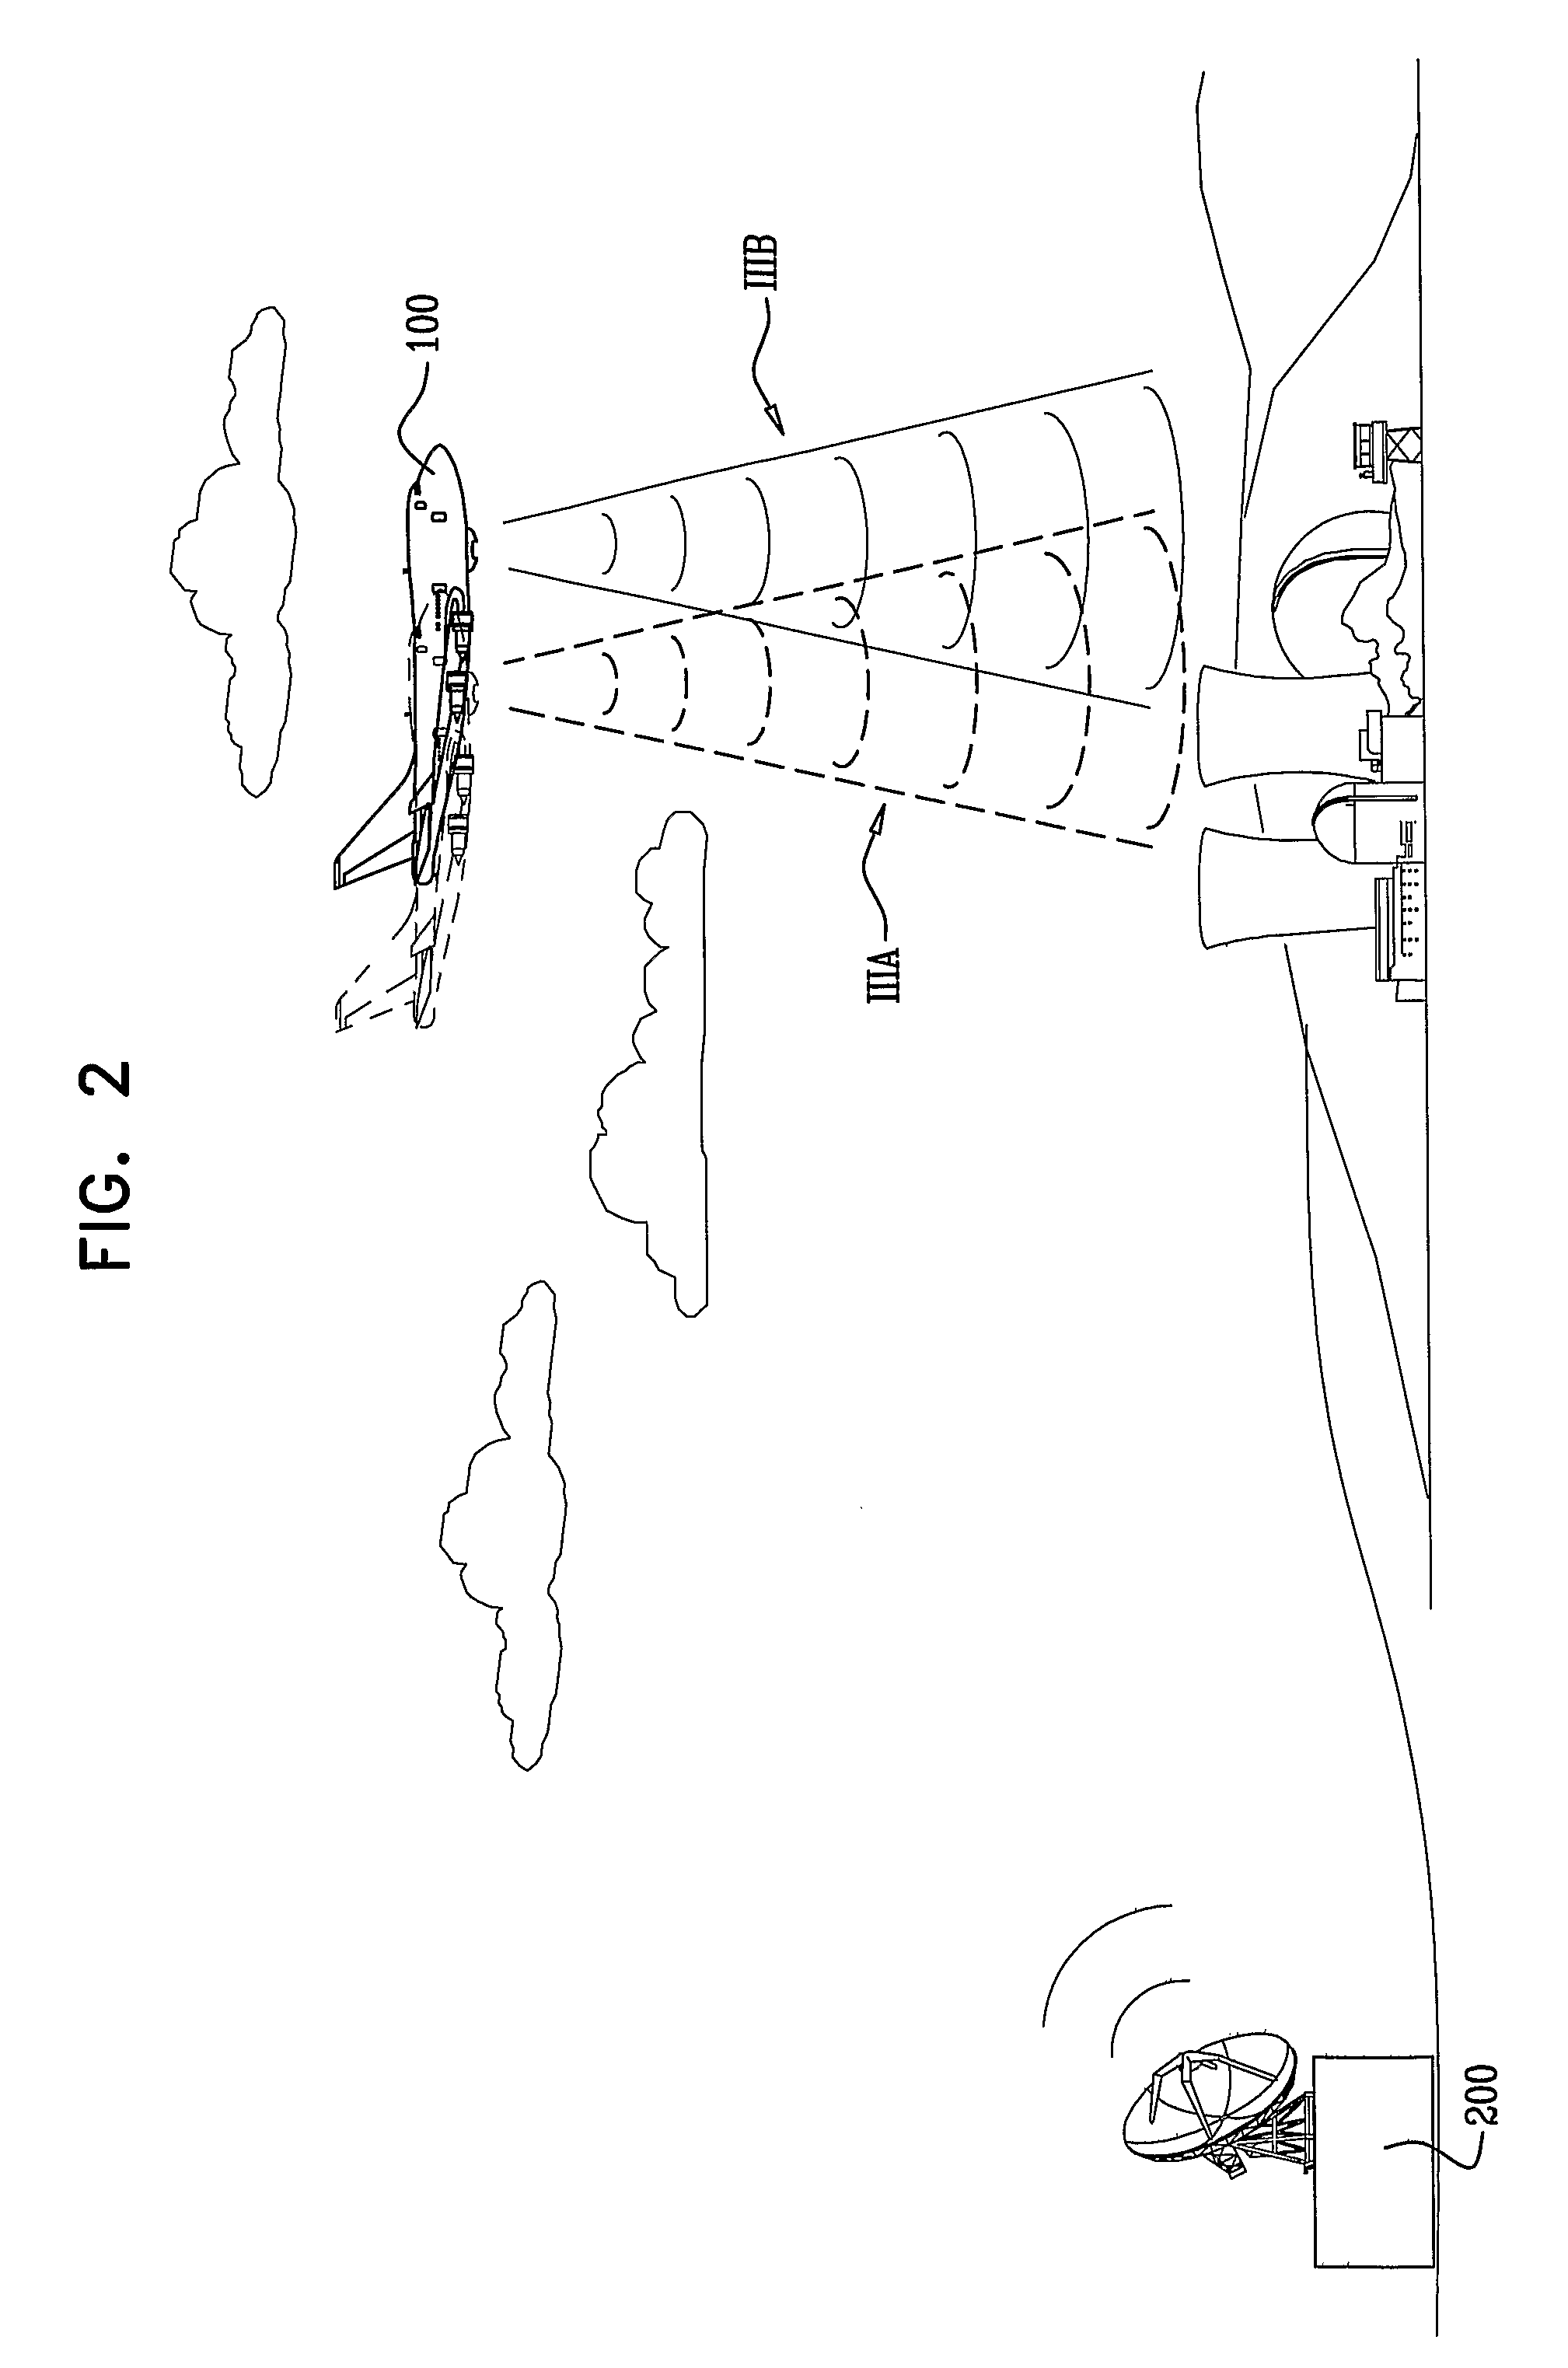 Method and system to perform optical moving object detection and tracking over a wide area